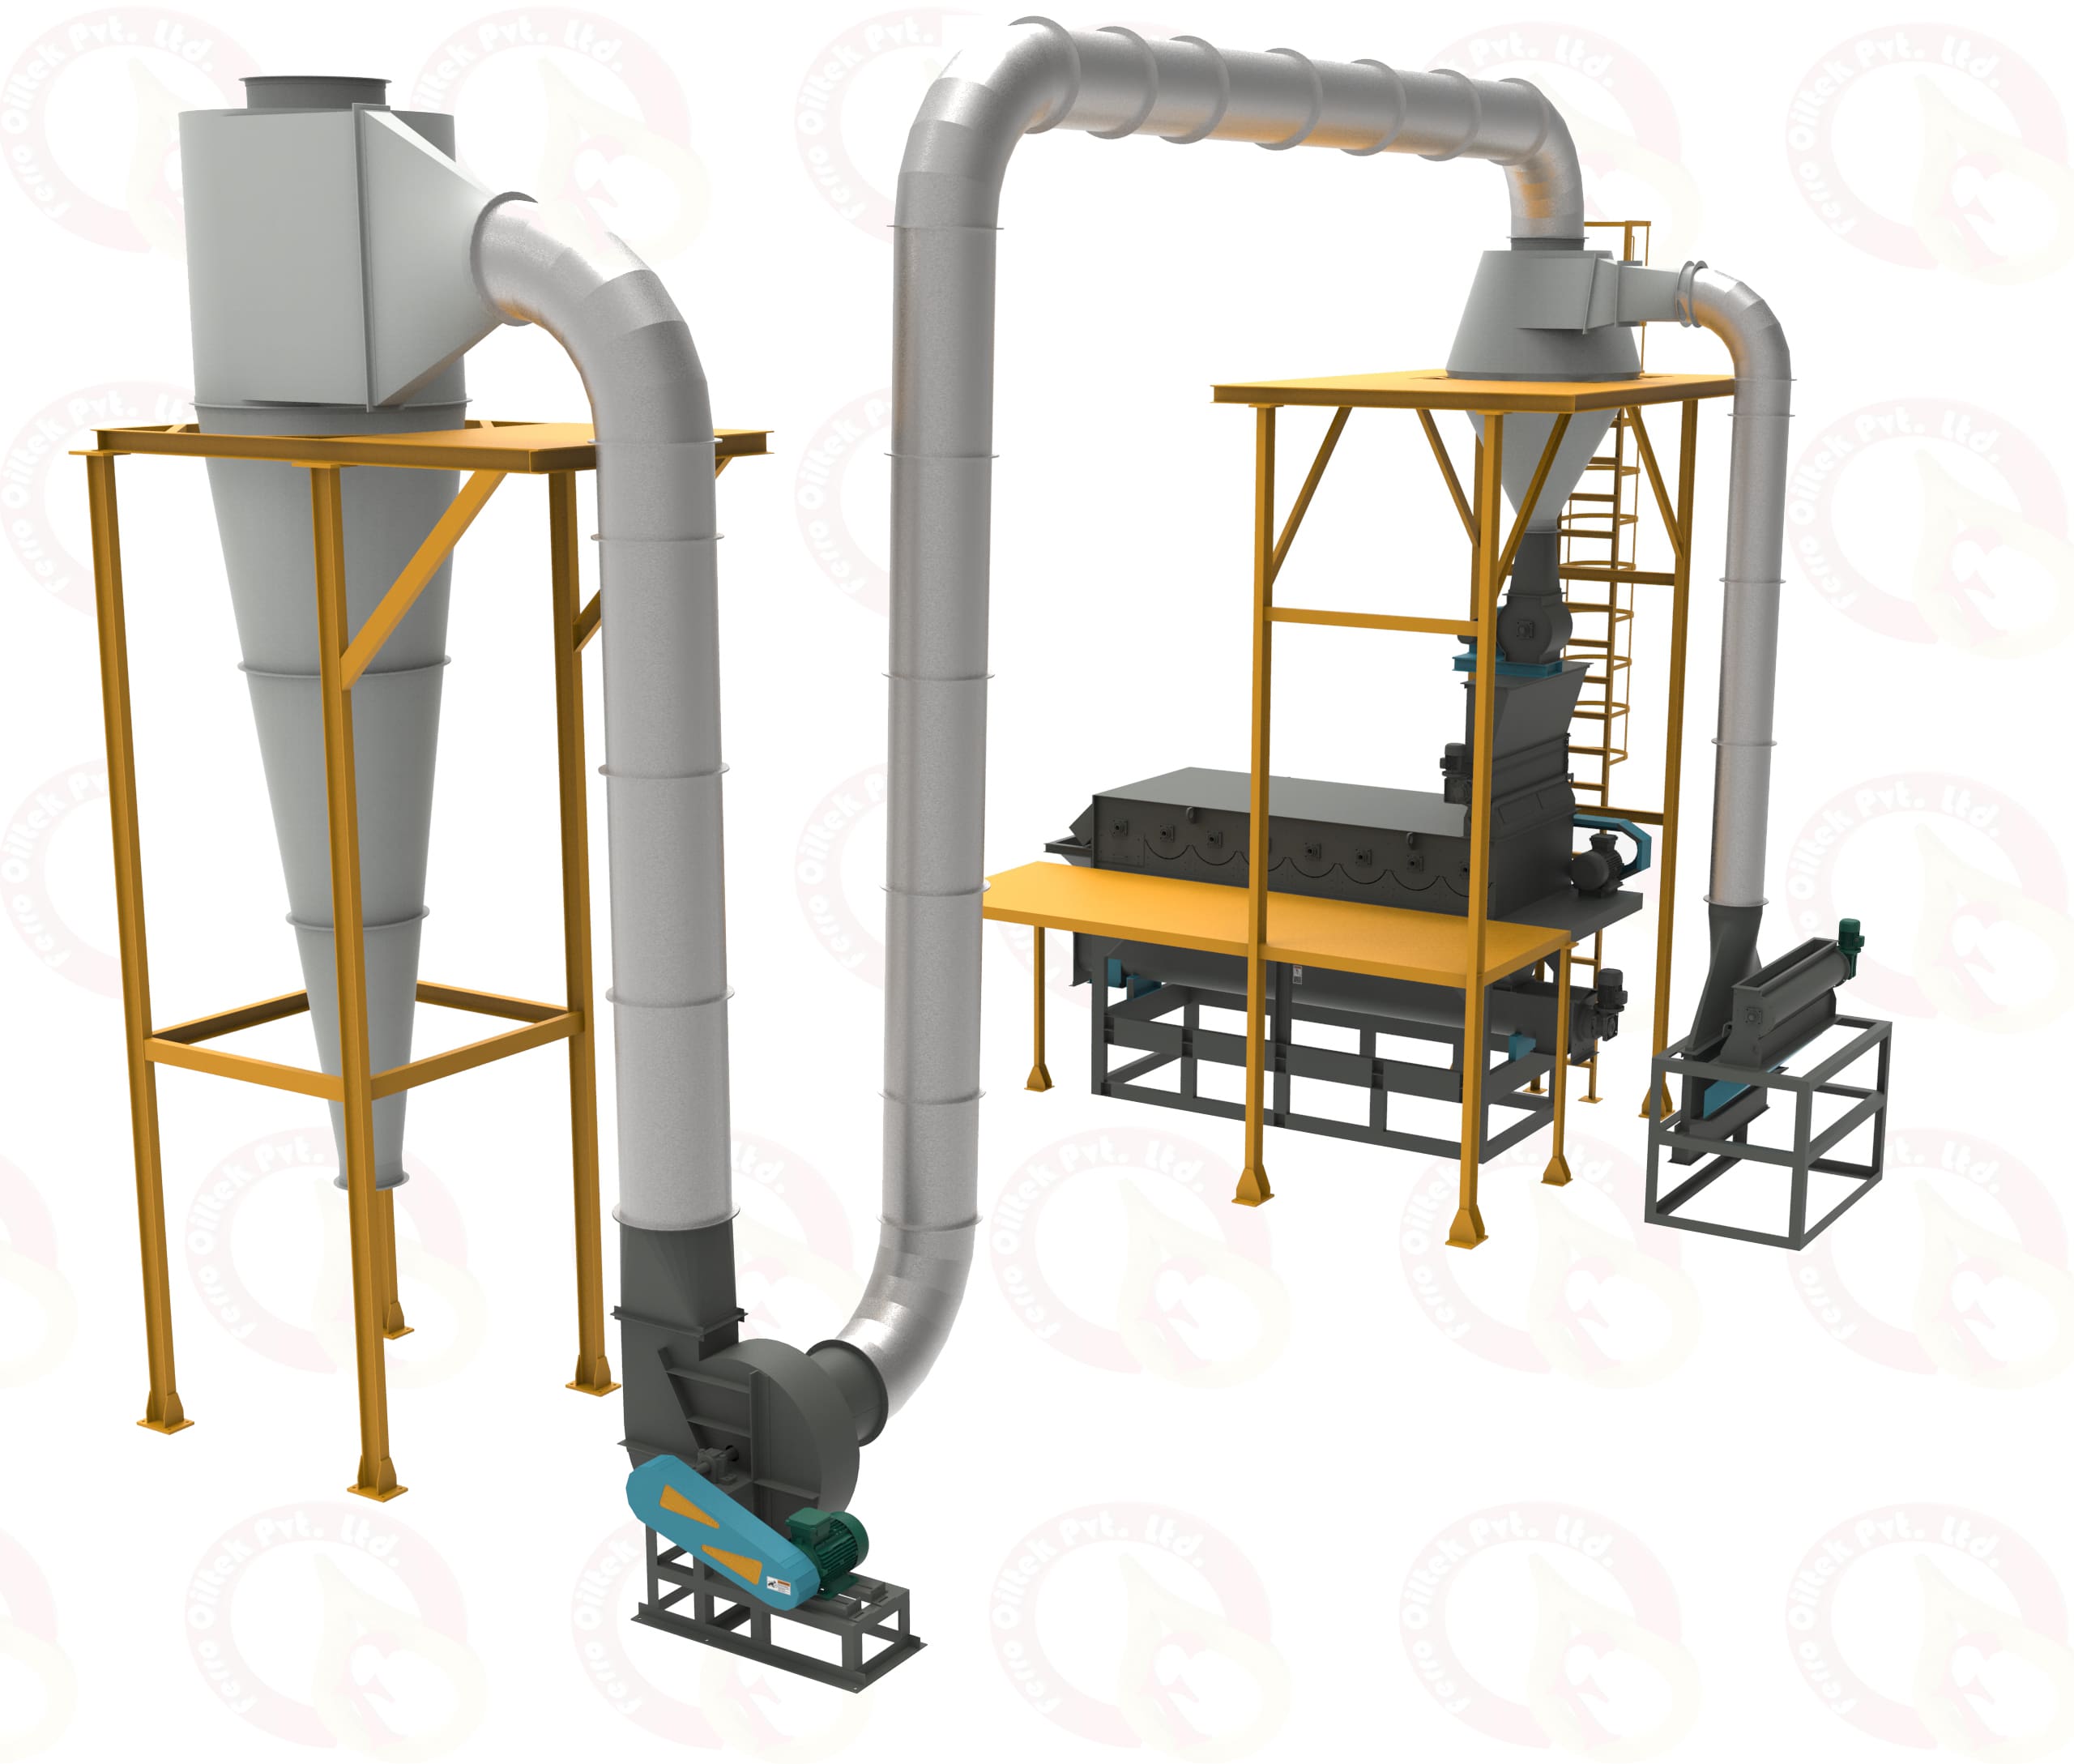 FX-PBTSC: Pneumatic Basket Type Seed Cleaner